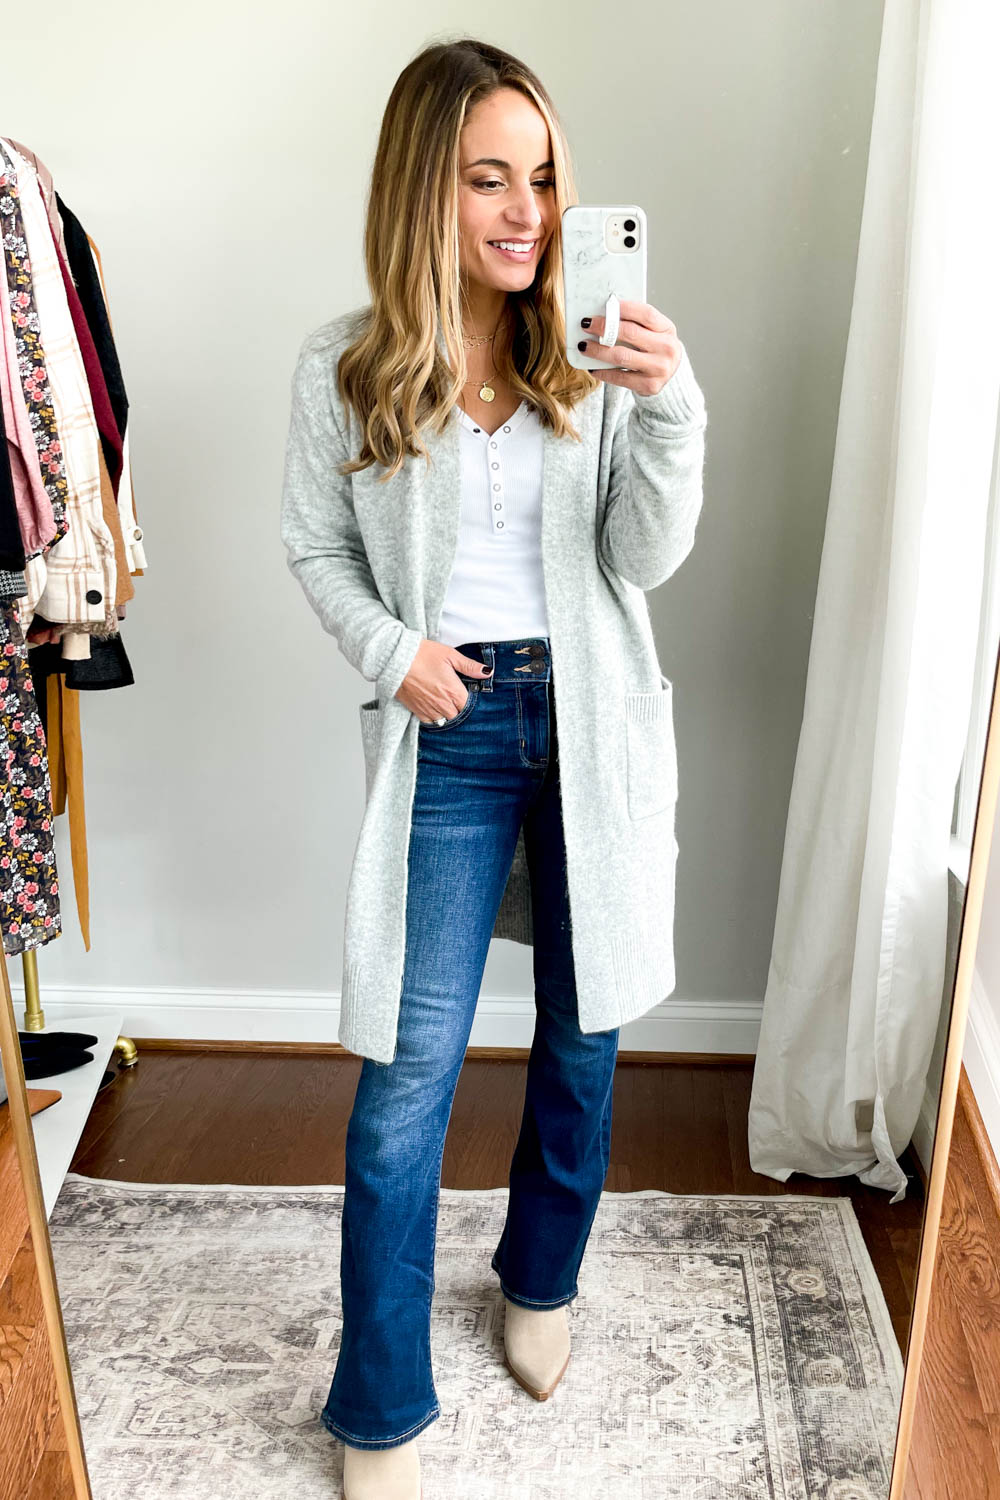 Shoes to Wear With Flare Jeans